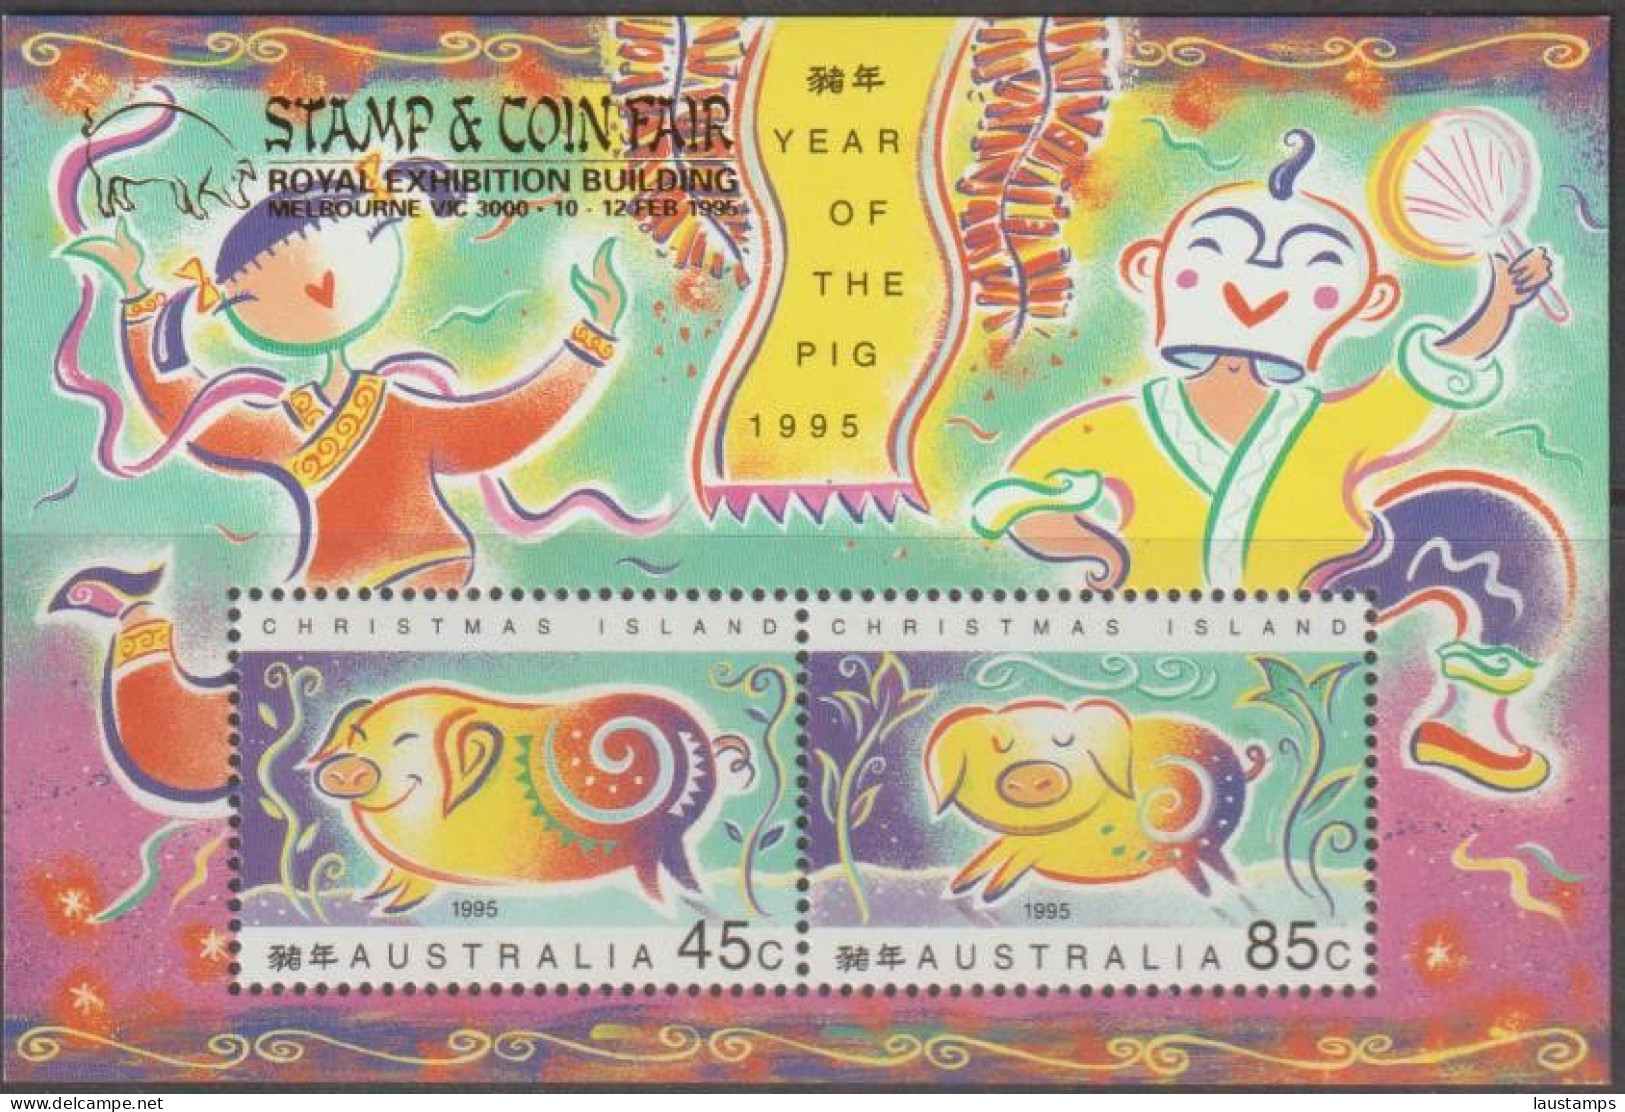 Christmas Island 1995 Year Of The Pig Ovpt Stamp & Coin Fair Melbourne S/S MNH - Chinese New Year